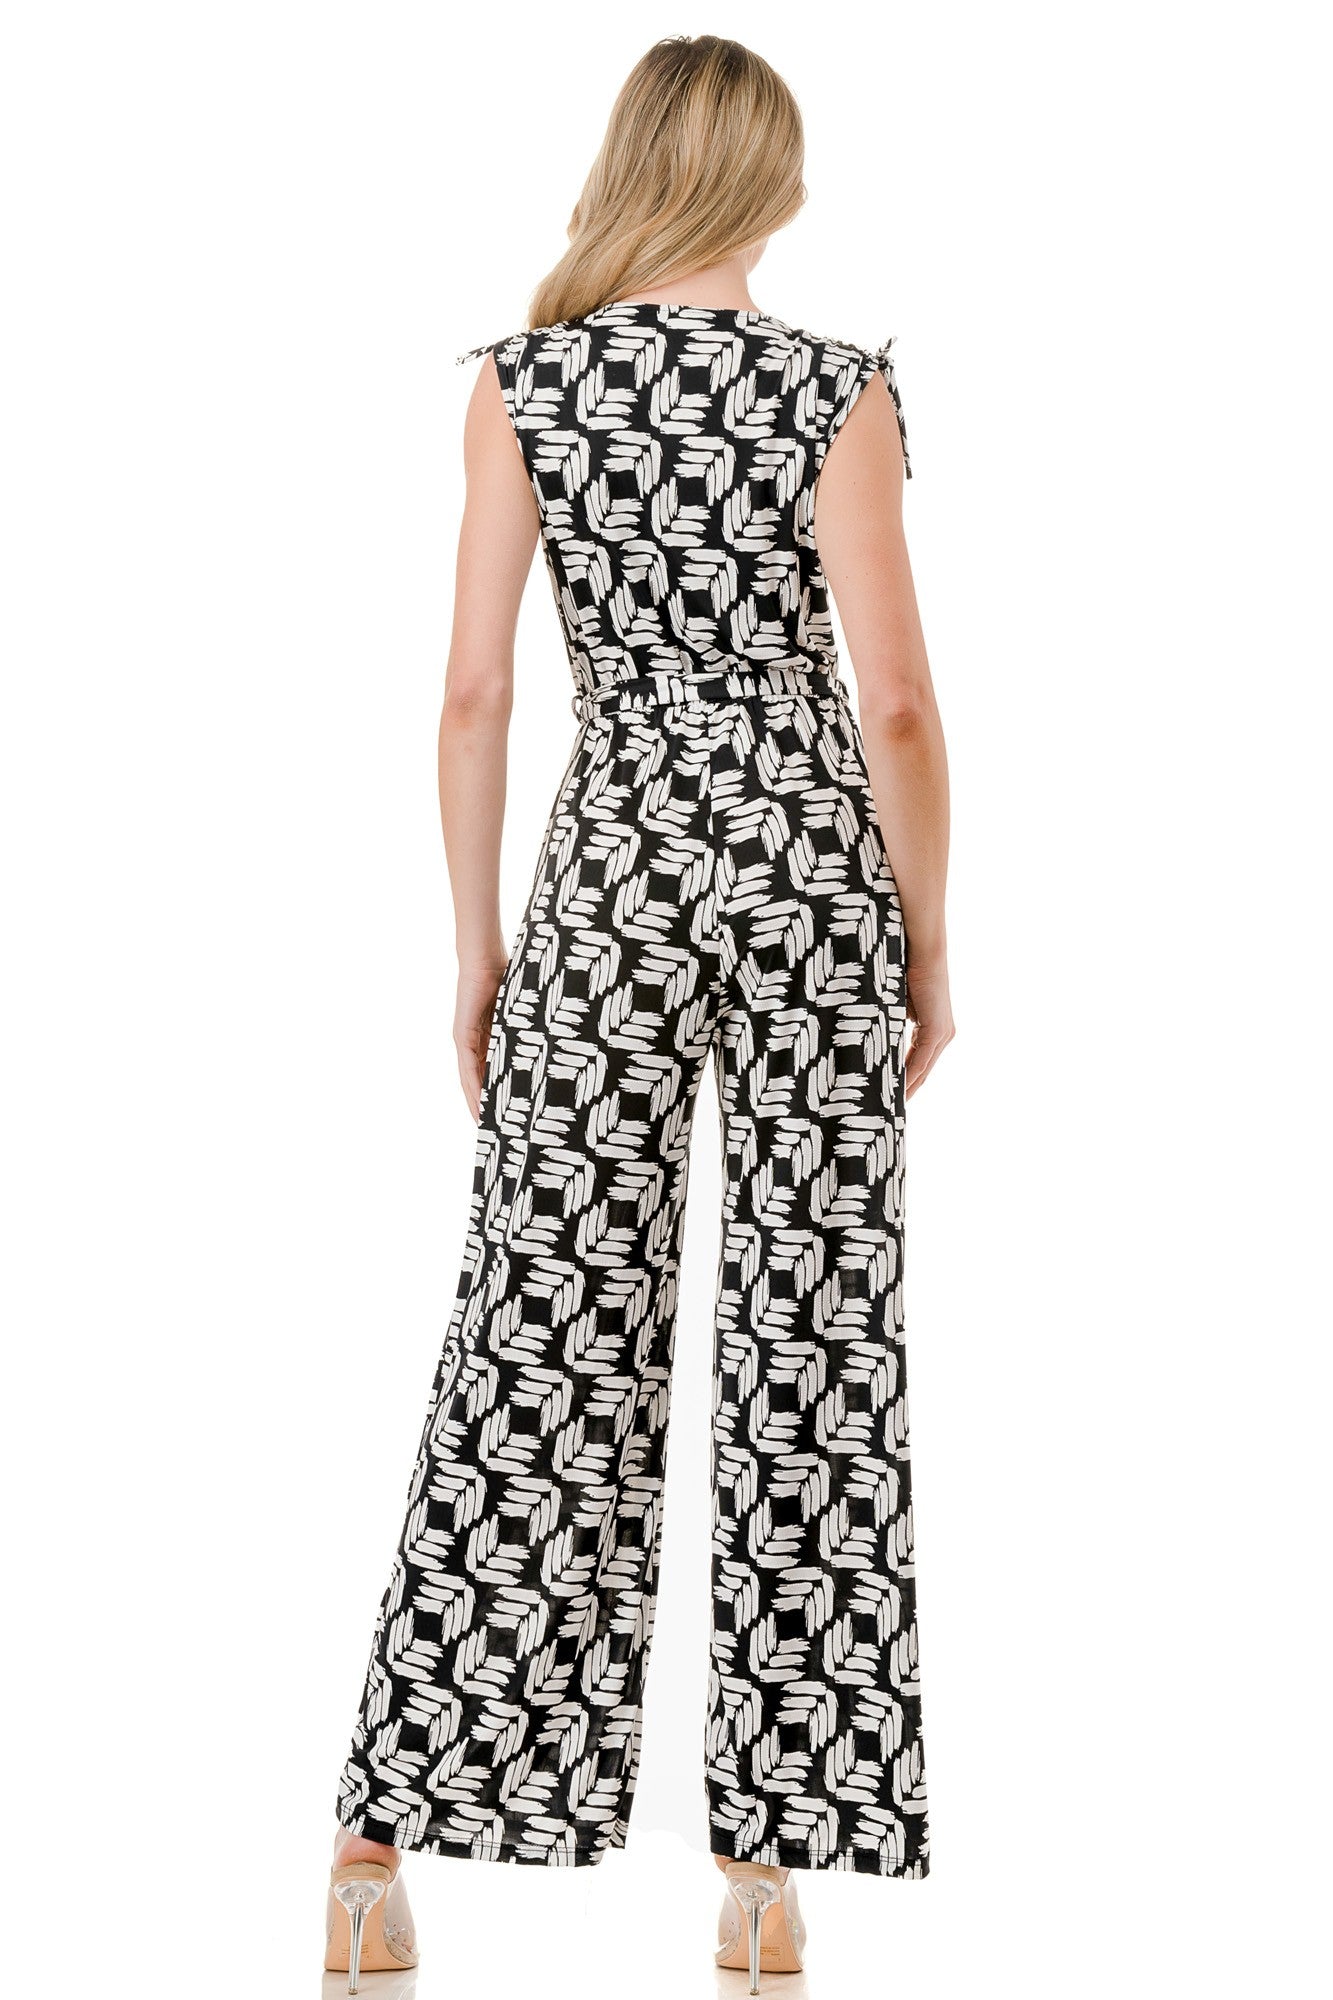 Dressy Jumpsuit, REBELRY BOUTIQUE, Arvada, CO